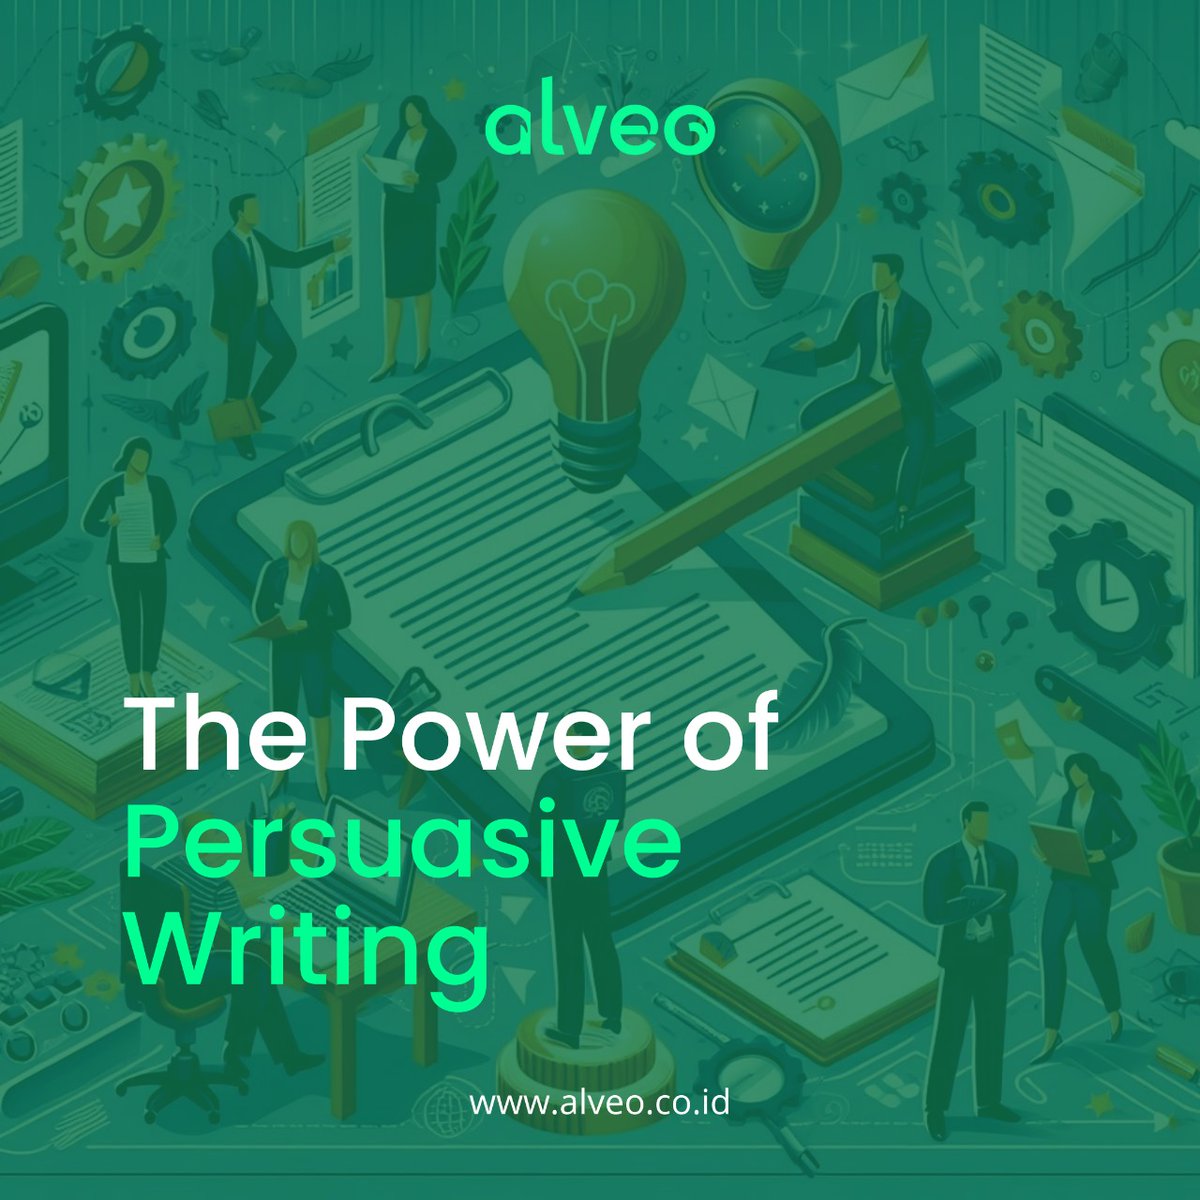 Persuasive writing goes beyond merely conveying facts, but it also entails weaving narratives that inspire people to take meaningful actions. Discover the intricacies of persuasive writing by exploring the ten tips outlined in the article available at wp.me/p9j4P1-s4